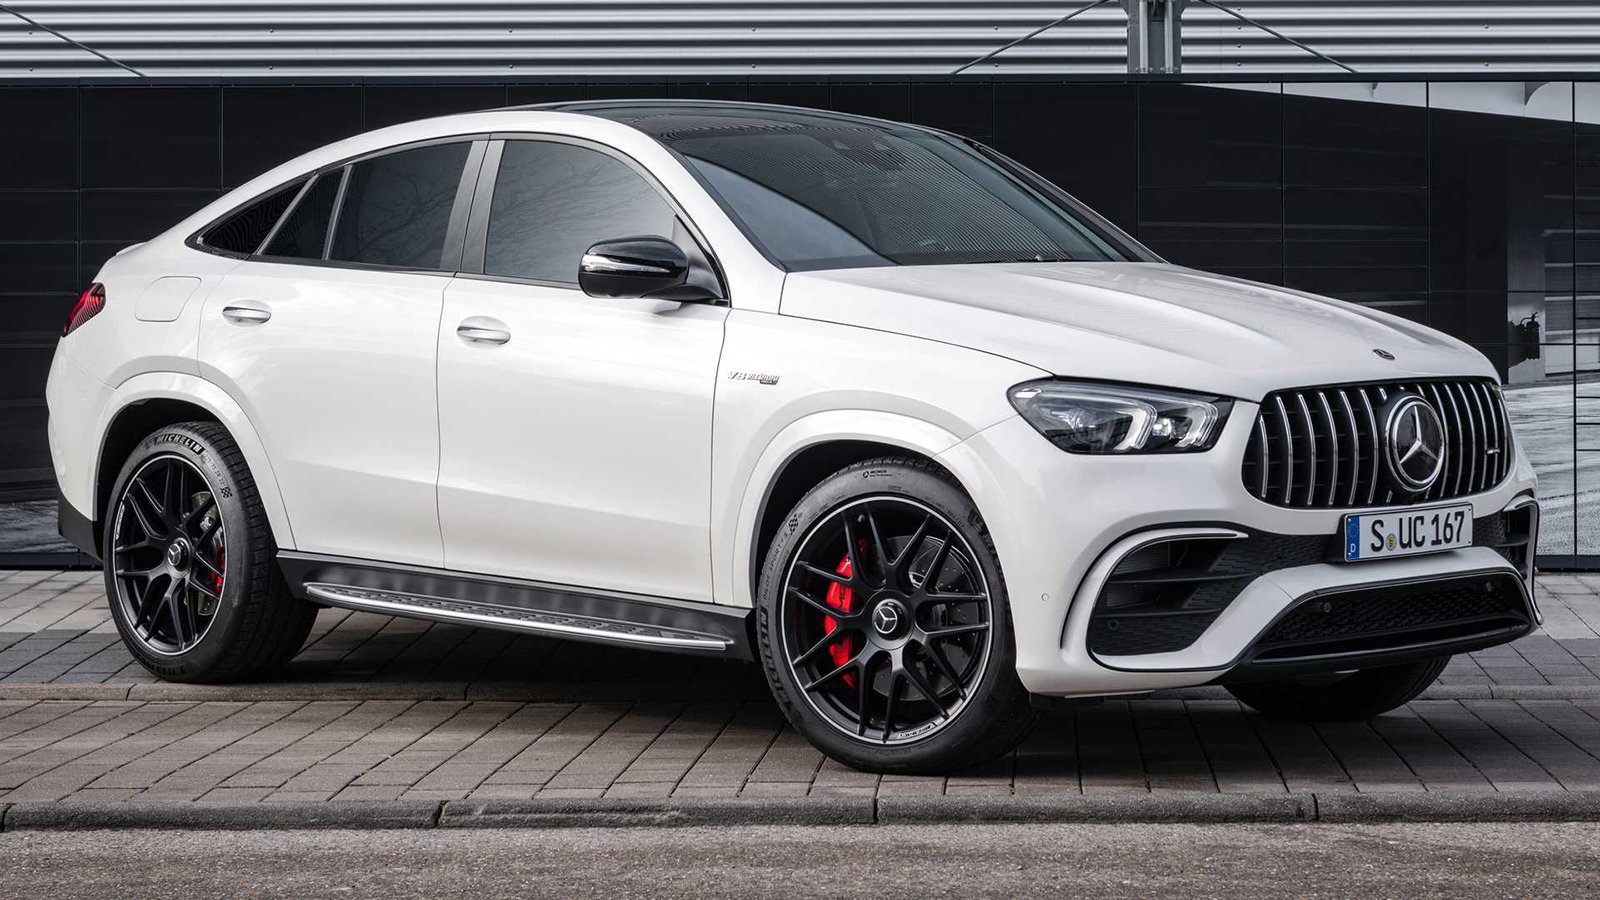 The 2021 AMG GLE 63 S Comes with Sleek Curves and 603HP Mbworld